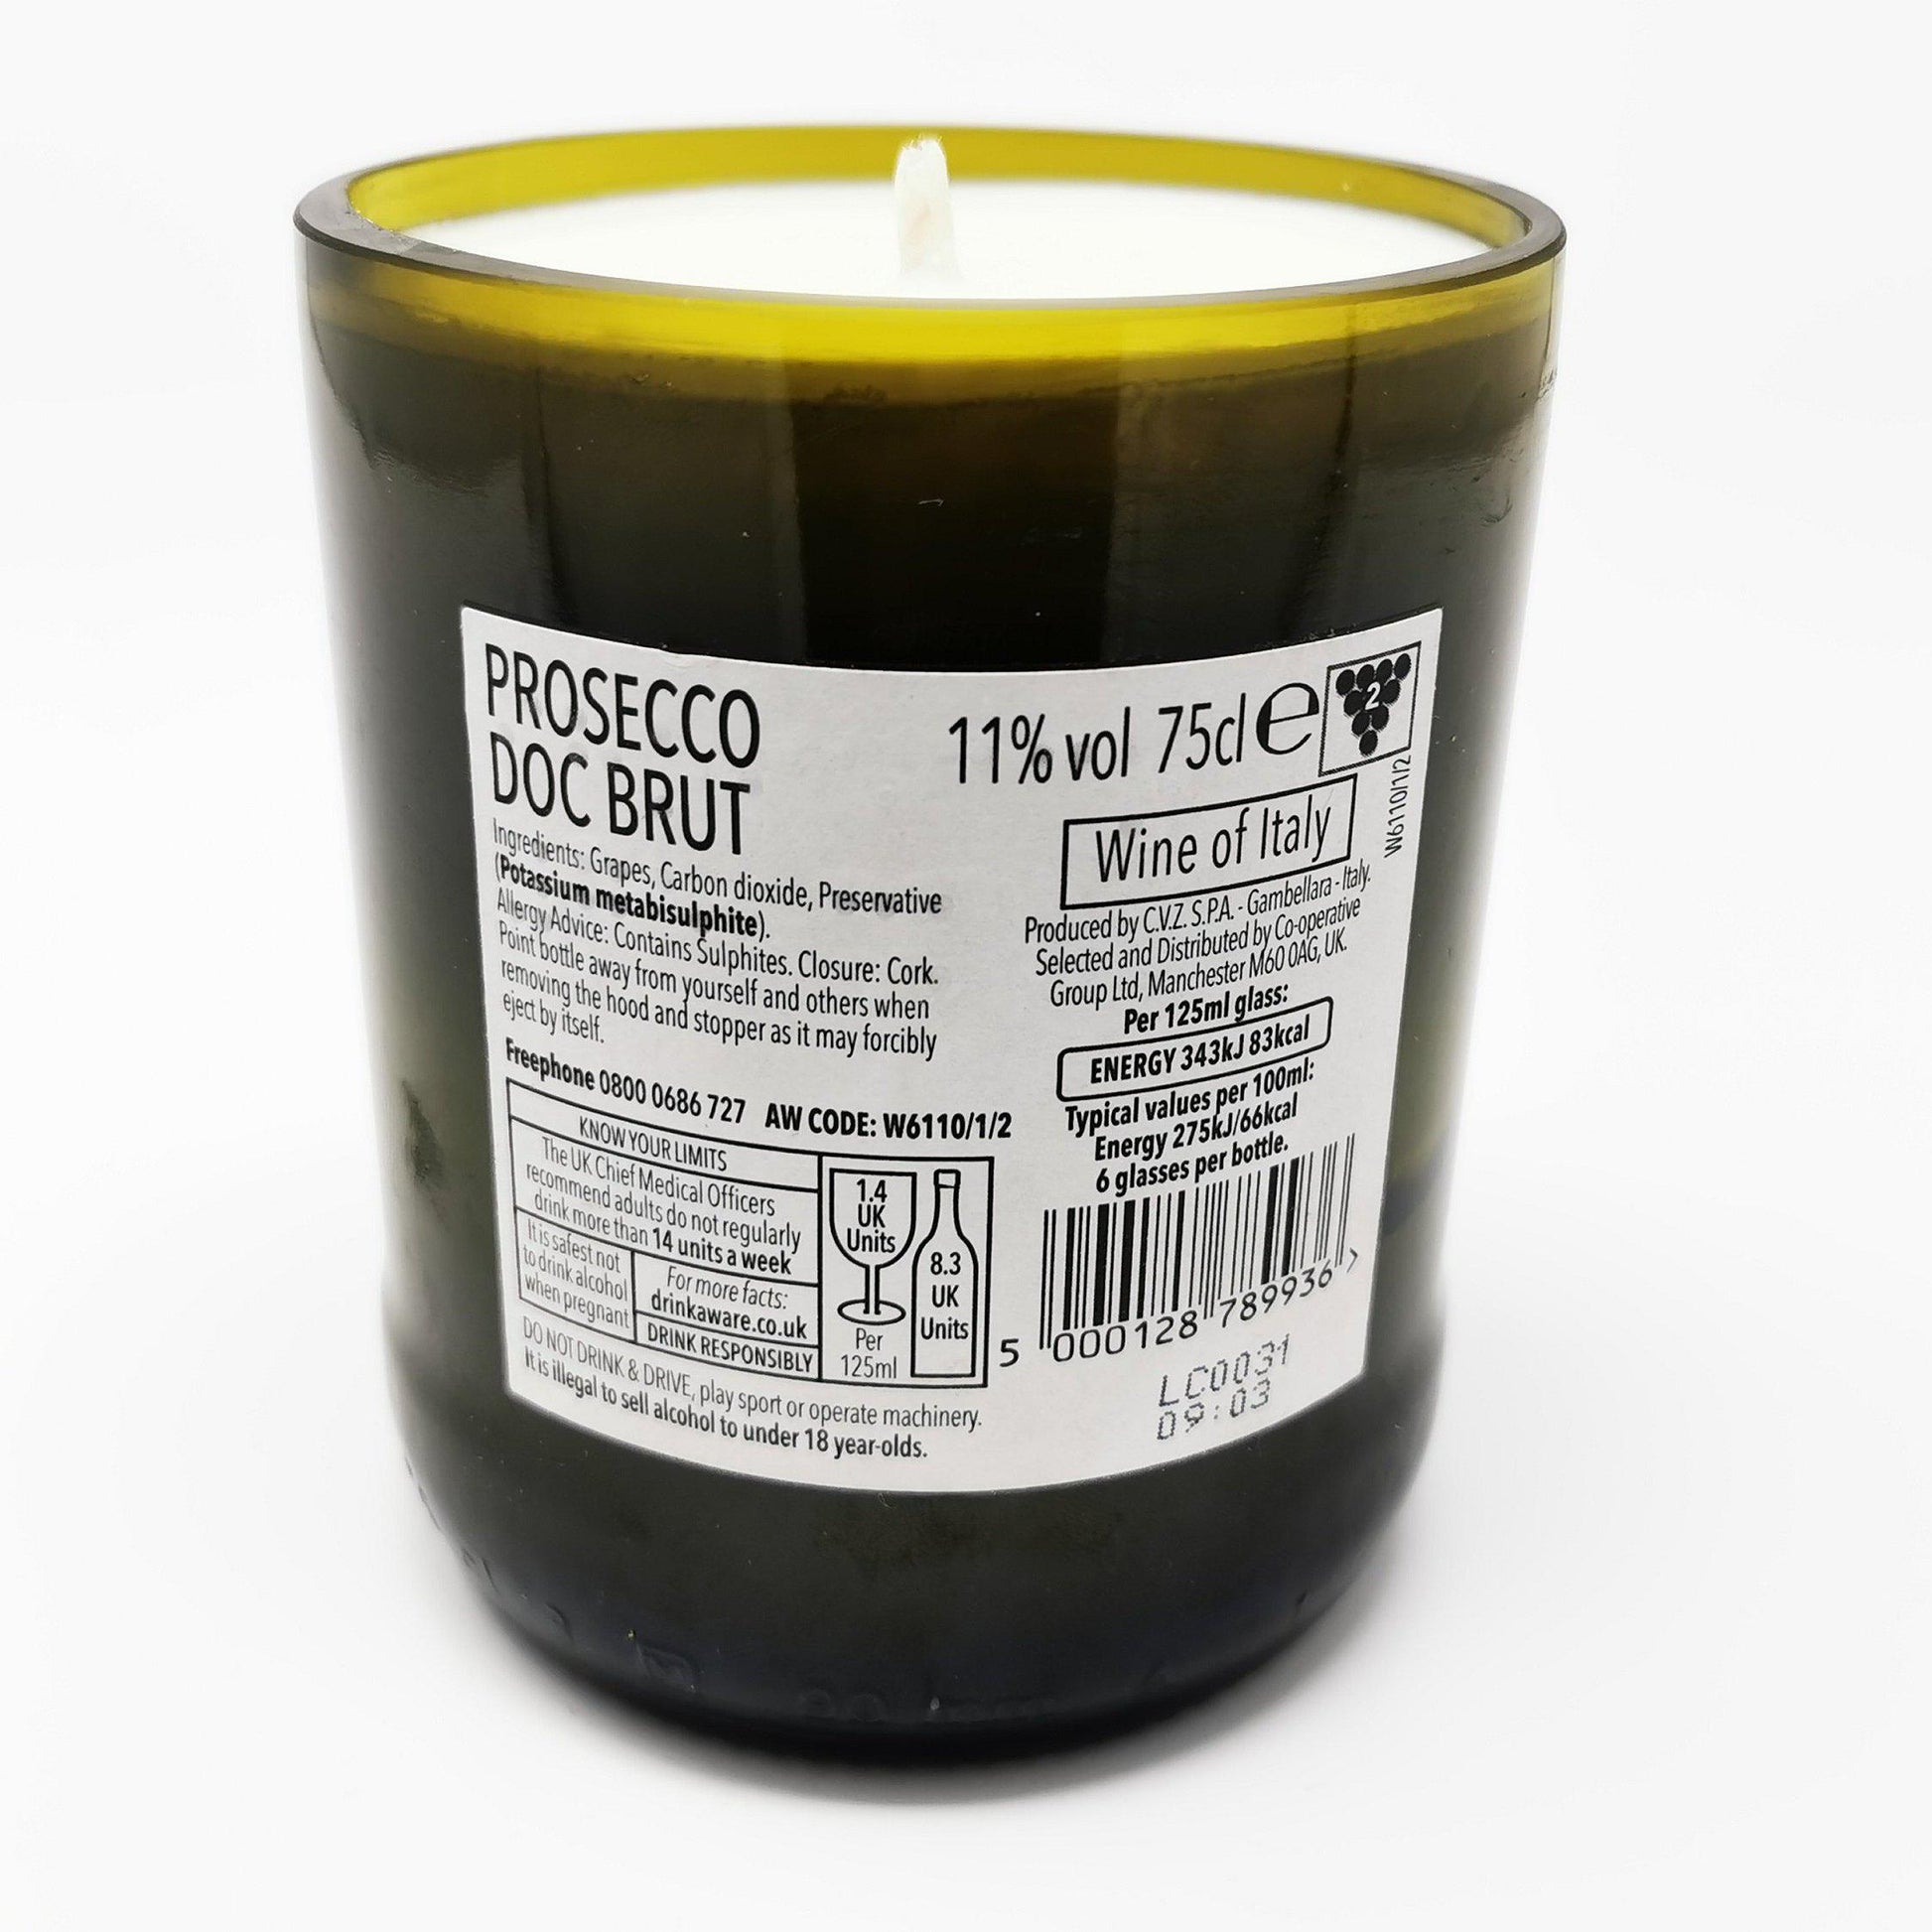 Prosecco Italian Curvee Bottle Candle-Wine & Prosecco Bottle Candles-Adhock Homeware